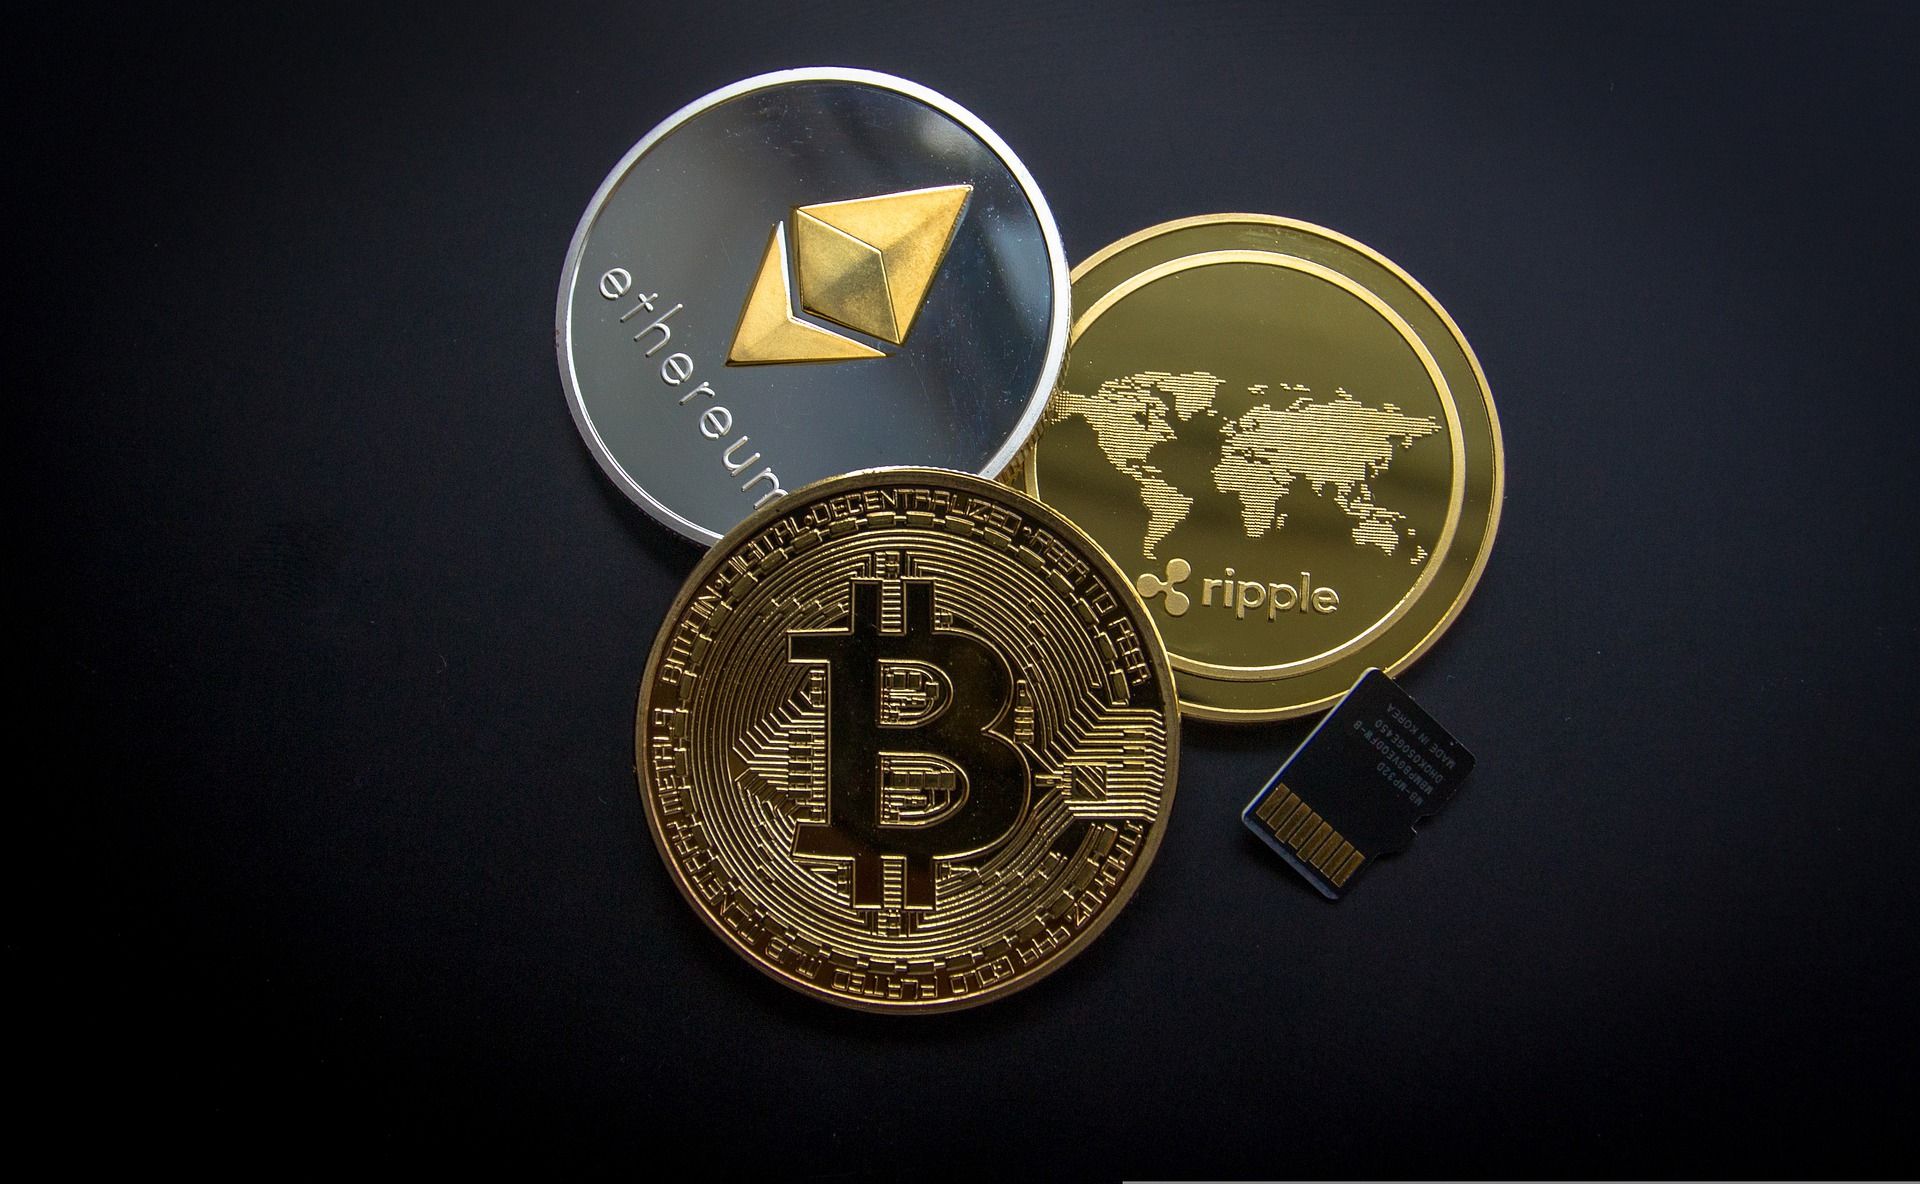 Top 5 cryptocurrencies of the day: Bitcoin up 3%, ETHW trends at no. 1